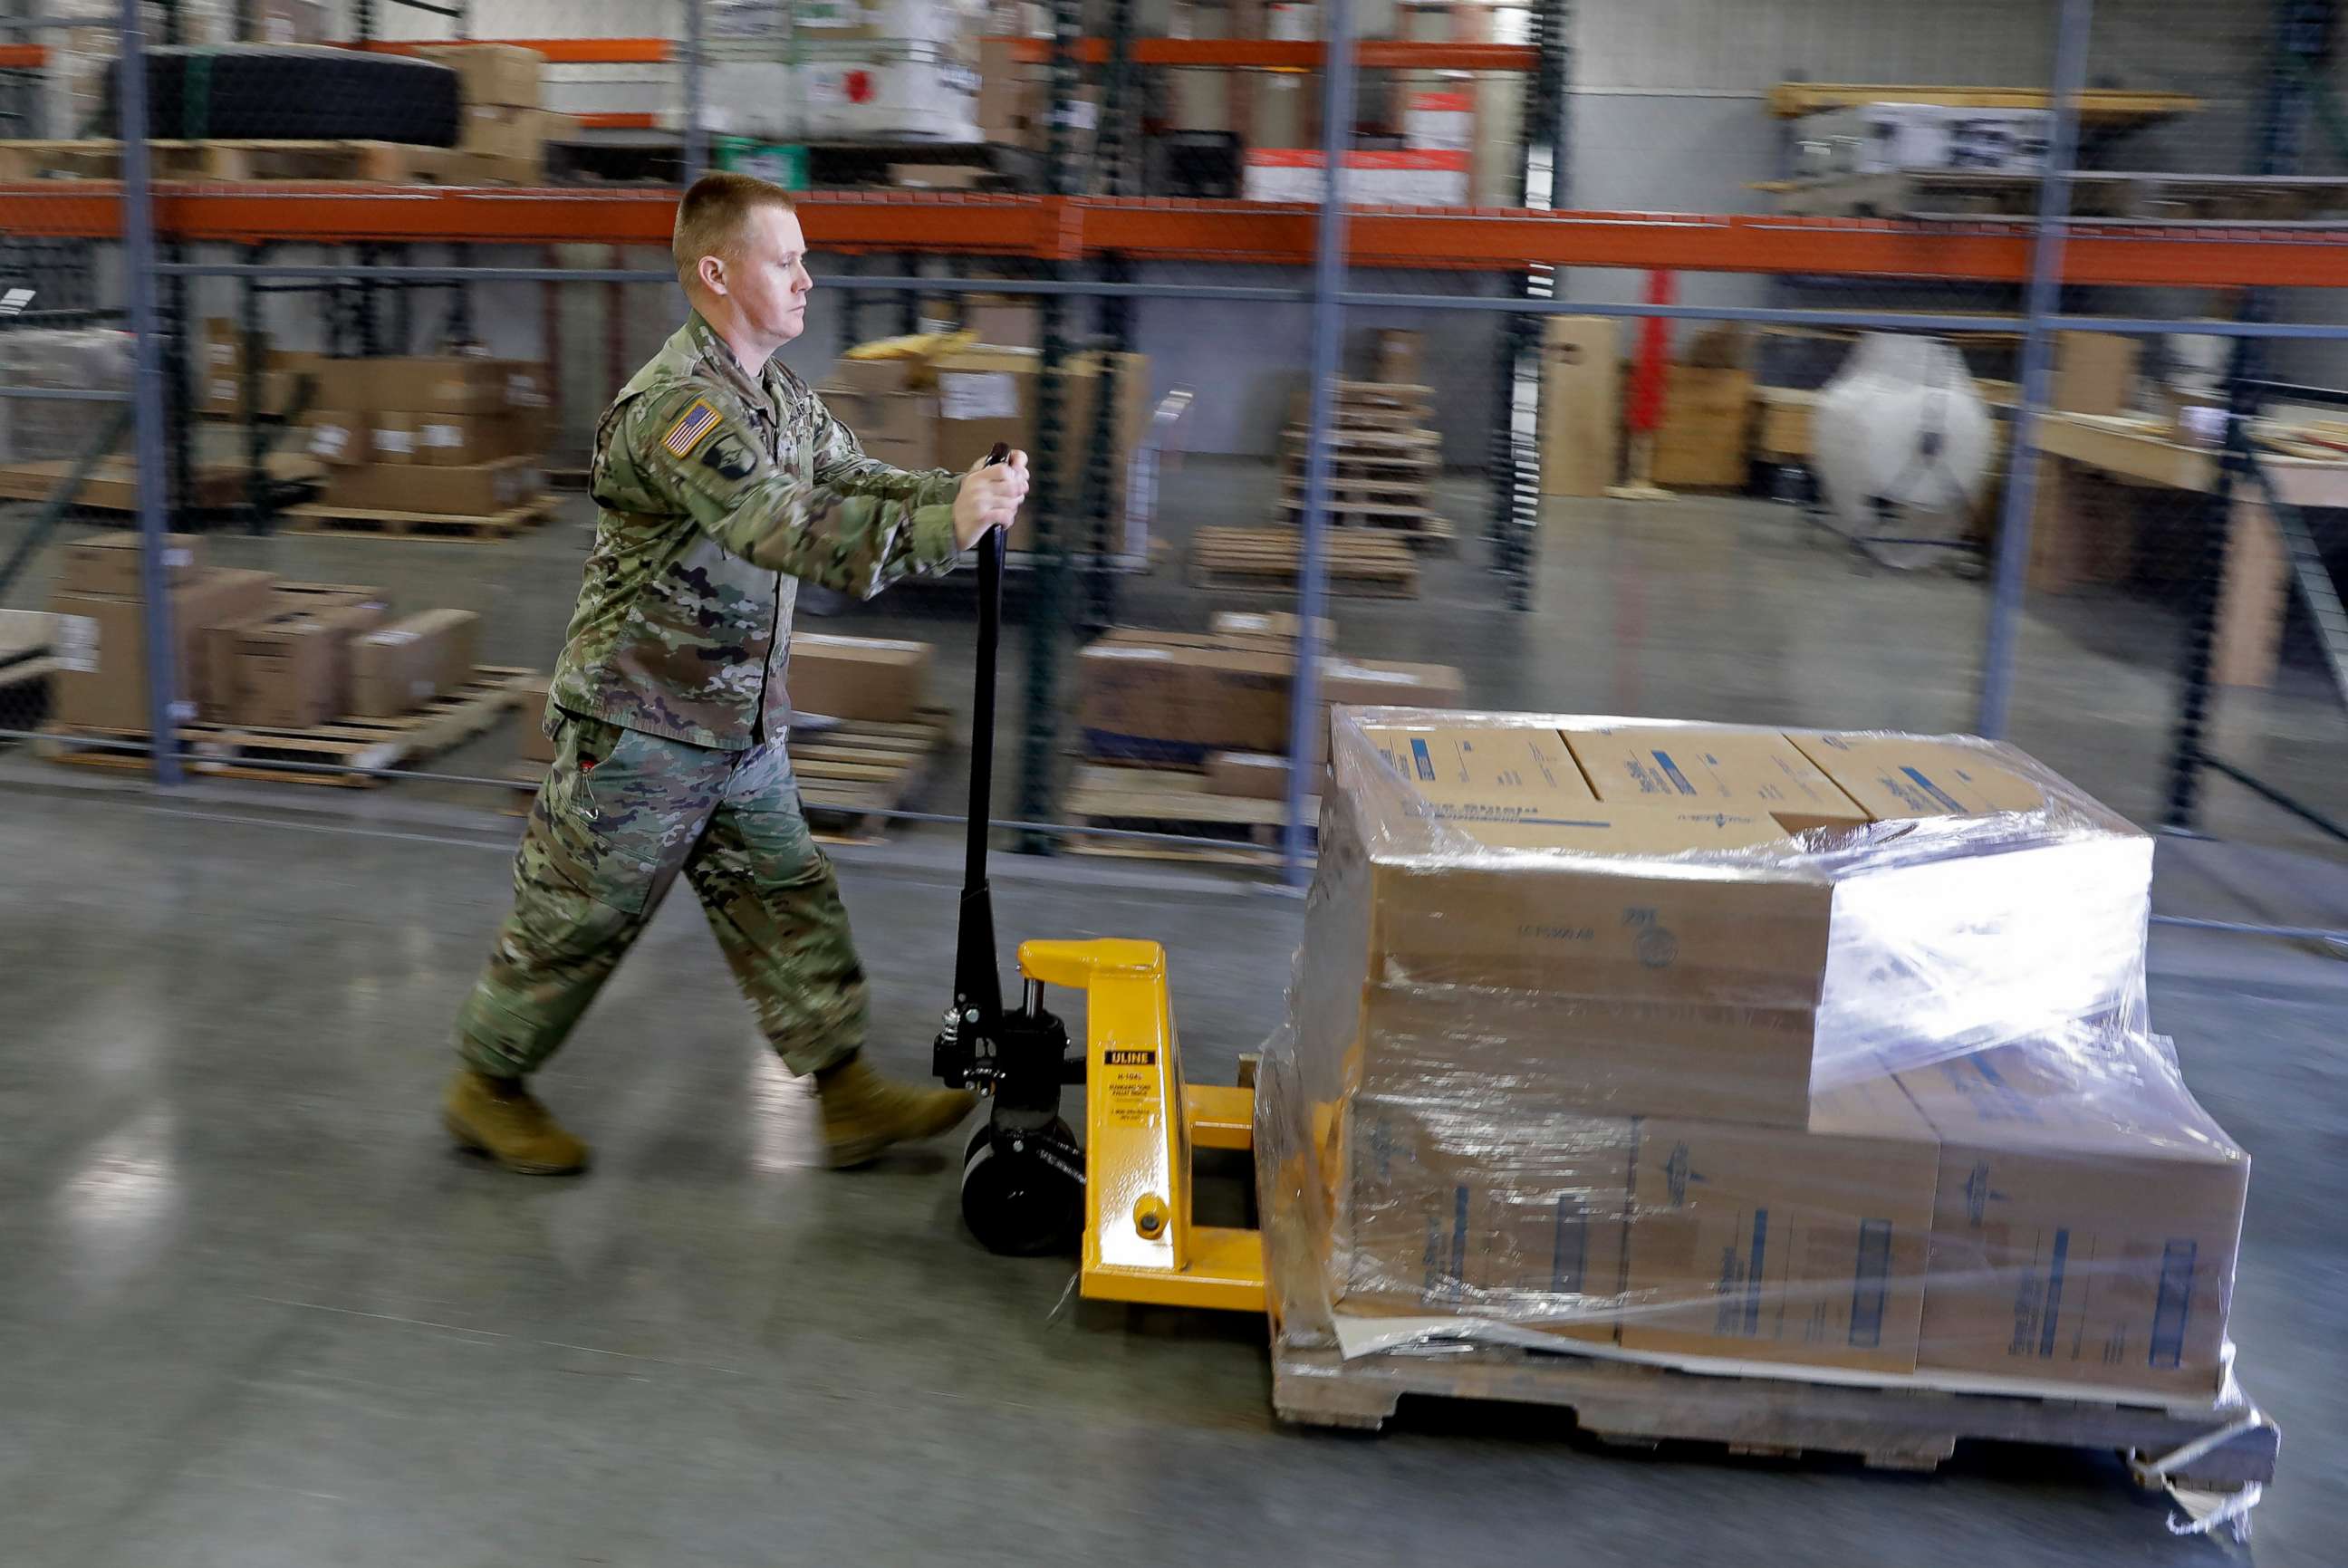 PHOTO: A Indiana National Guardsman pushes a pallet of medical supplies to be delivered, March 26, 2020, in Indianapolis. 